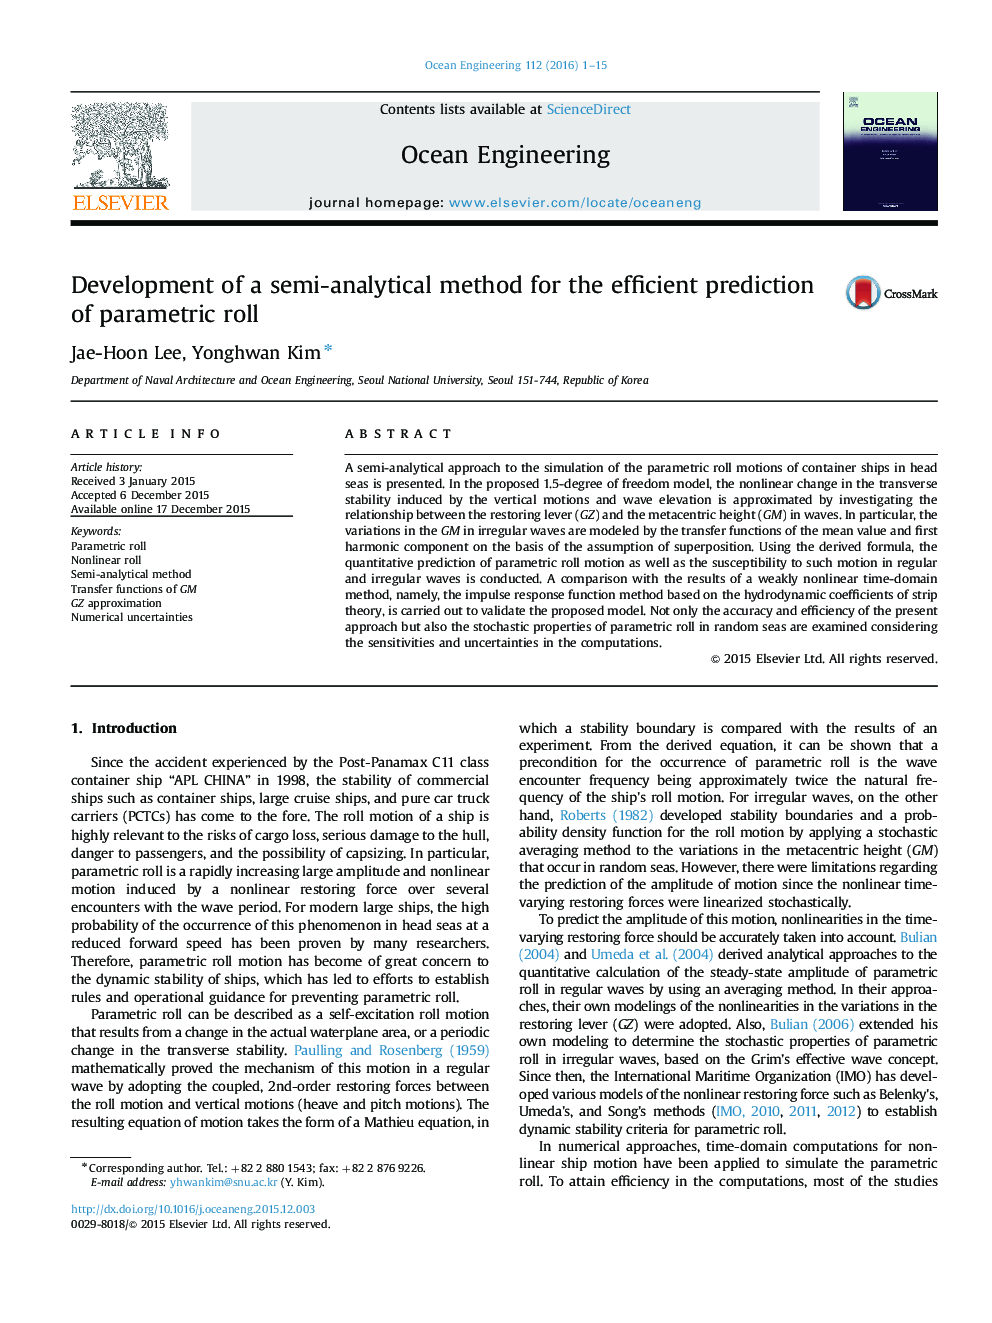 Development of a semi-analytical method for the efficient prediction of parametric roll